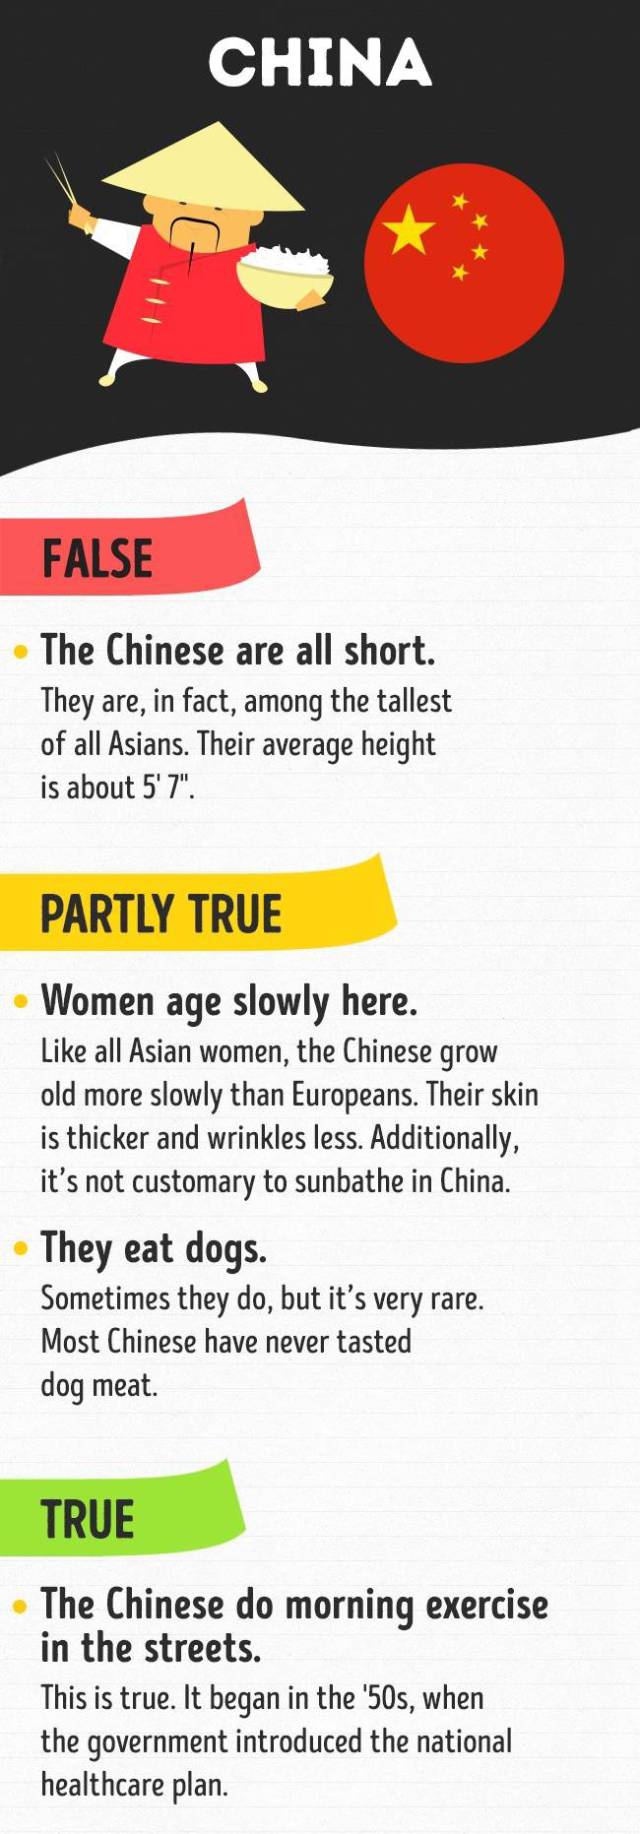 You Know All Of These Stereotypes About Nations. But Are They True?